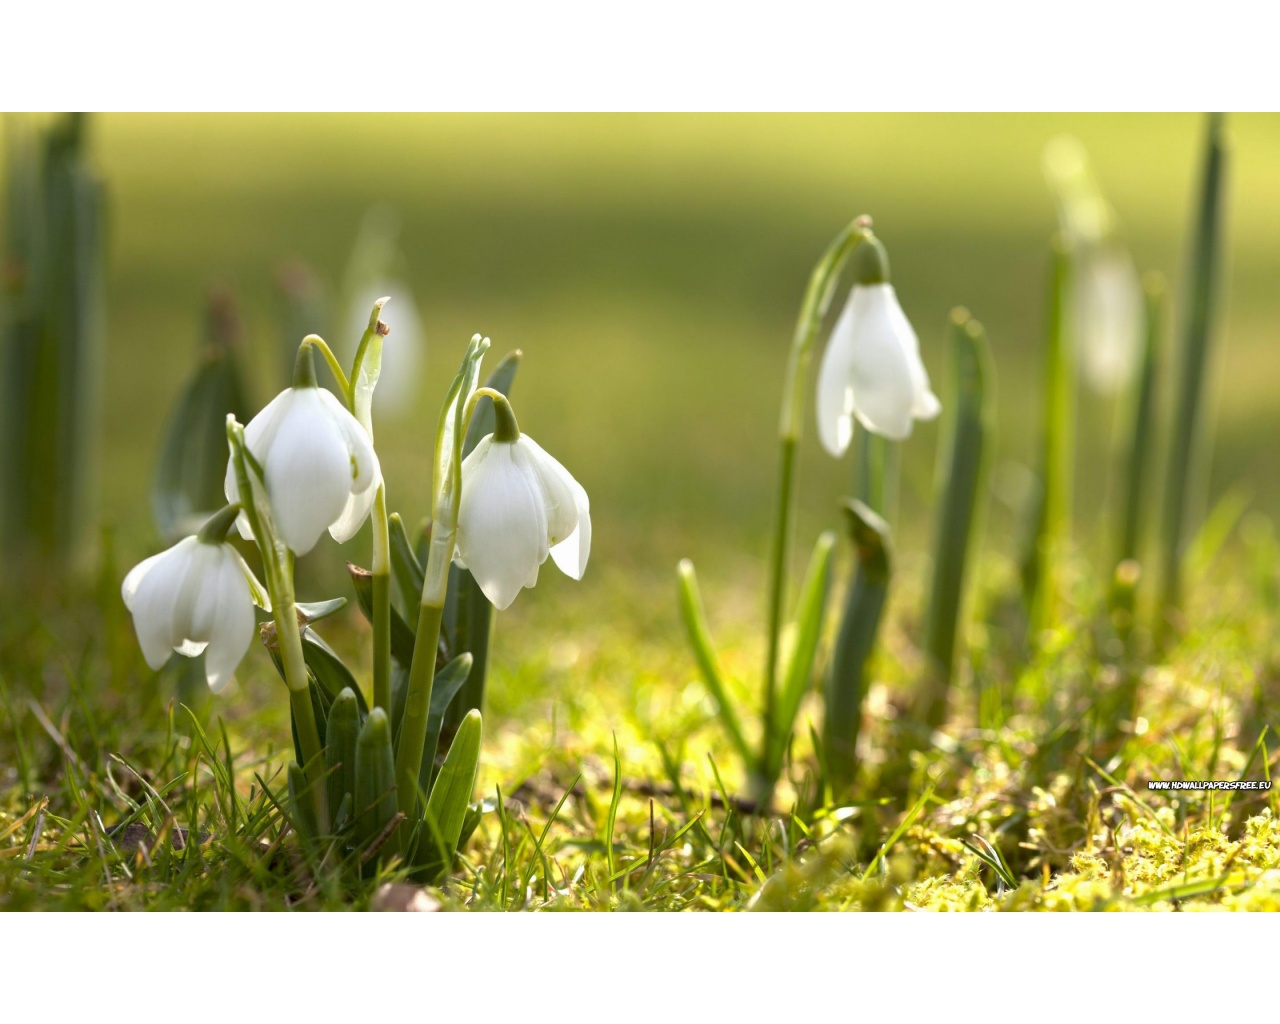 Snowdrops Spring Flowers Wallpaper in 1280x1024 Resolution